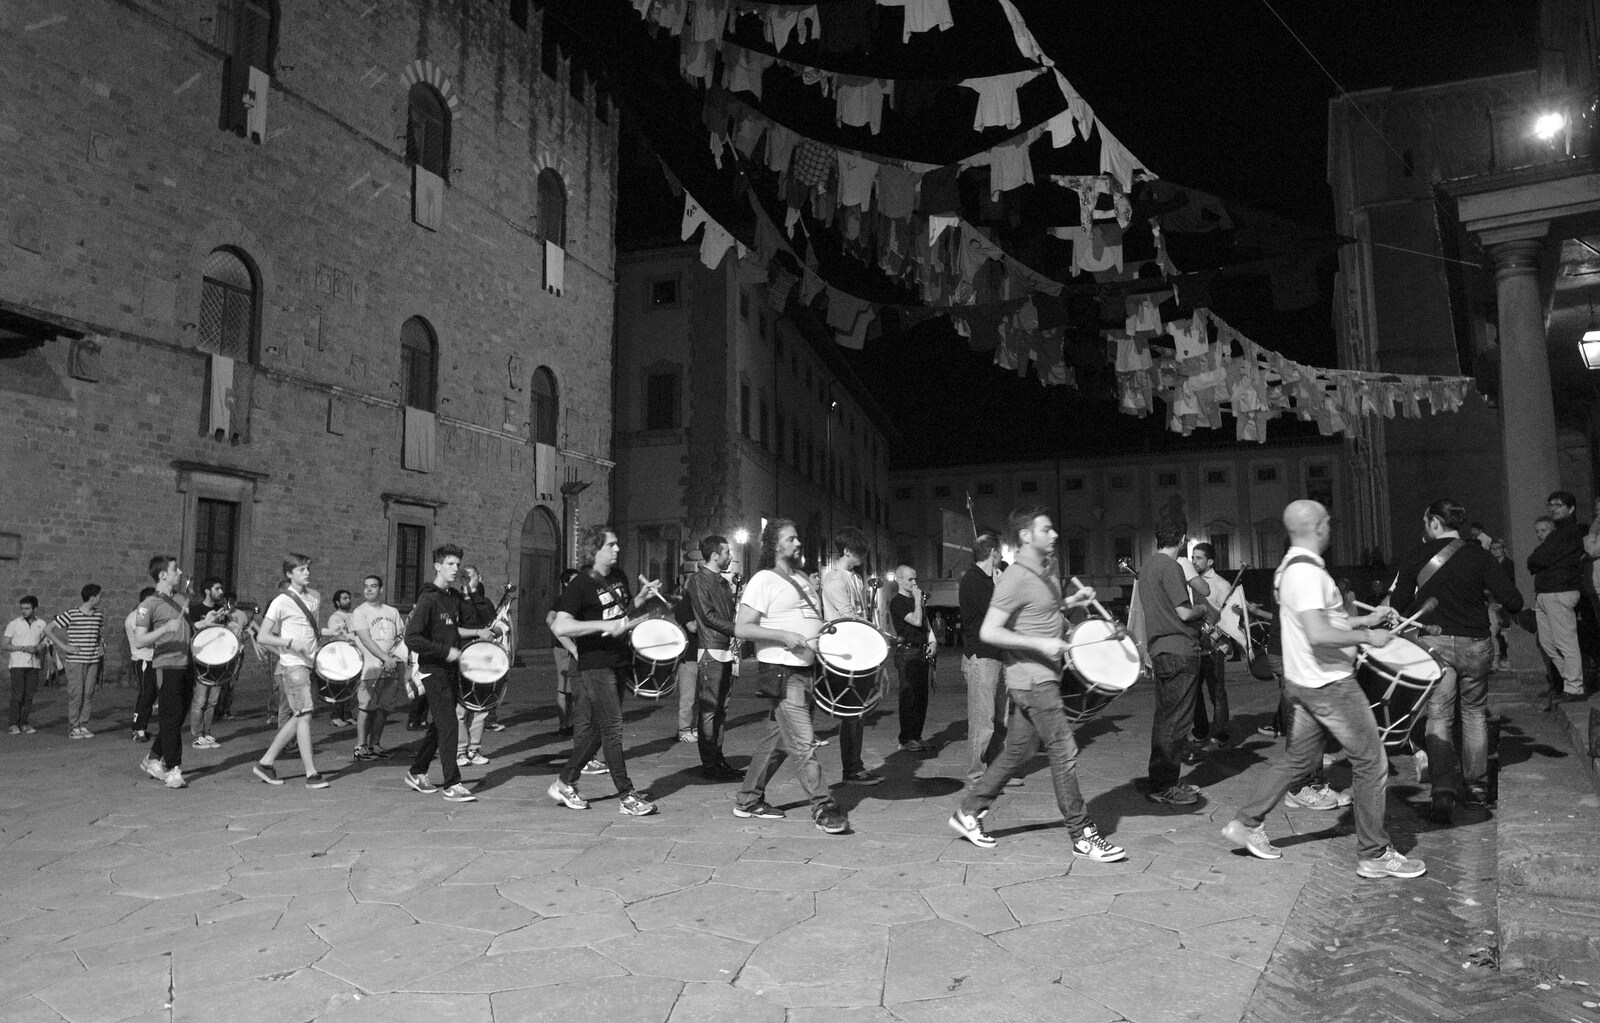 The drummers march off from Italian Weddings, Saracens and Swimming Pools, Arezzo, Tuscany - 12th June 2013